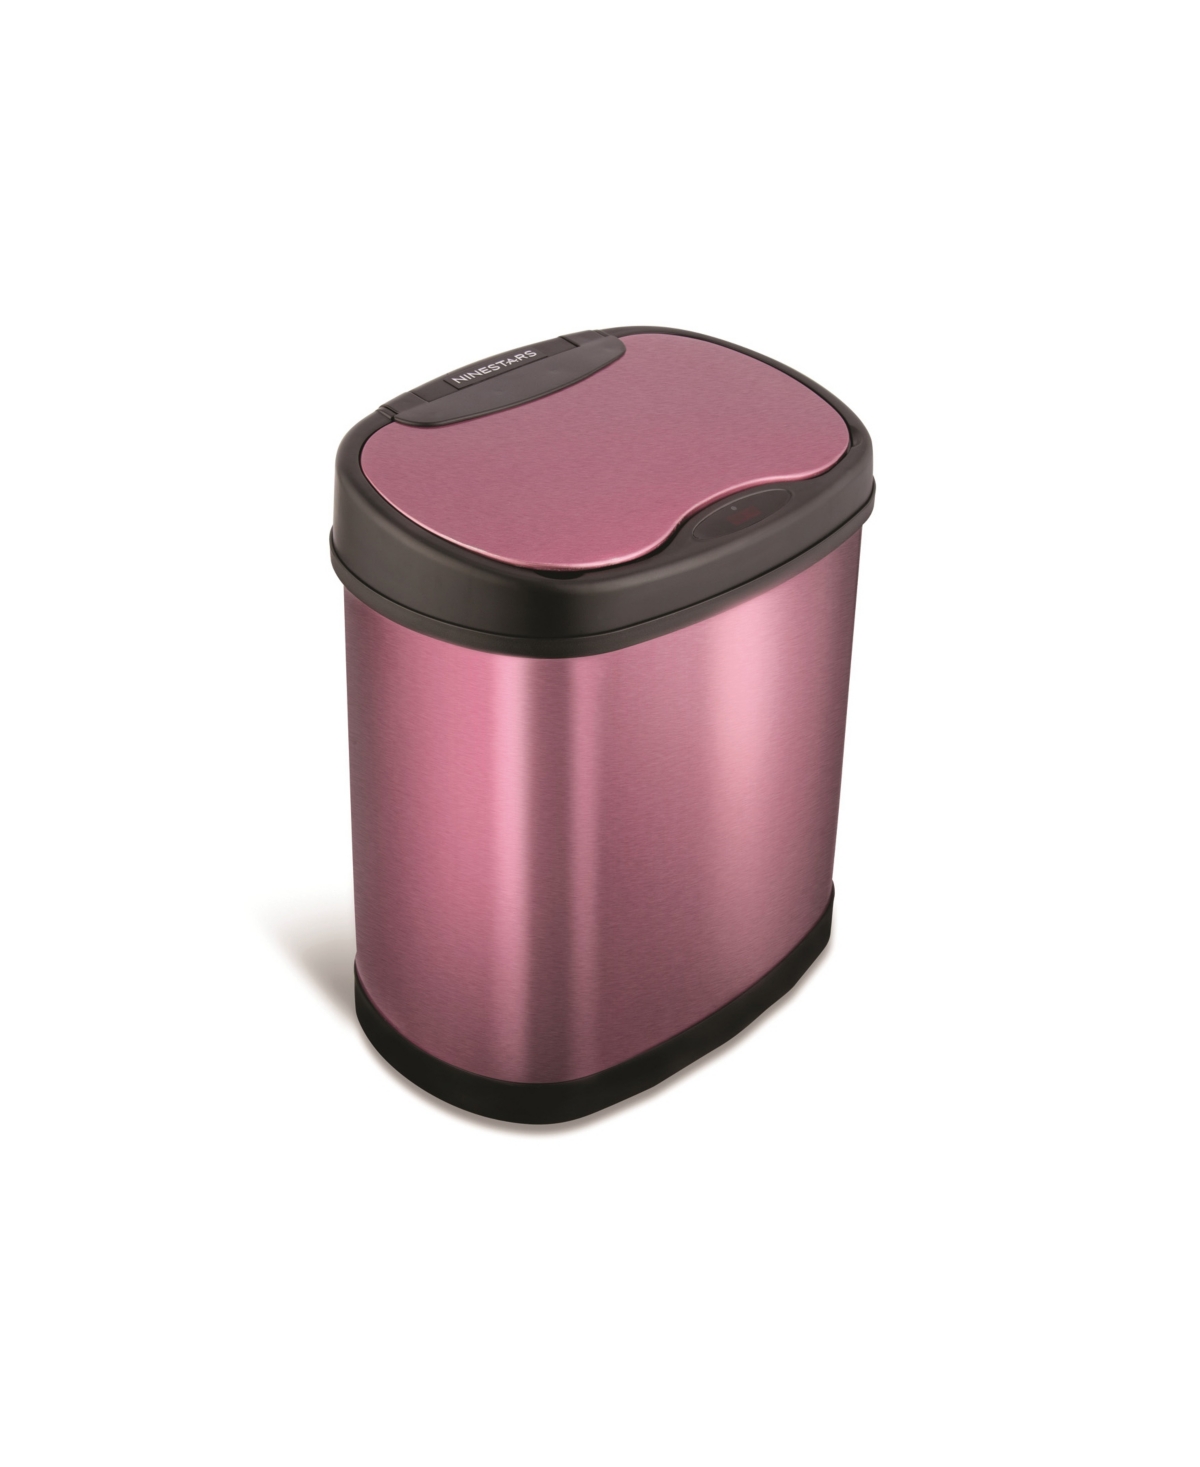 Shop Nine Stars Group Usa Inc Stainless Steel 3.2 Gallons Motion Sensor Trash Can In Burgundy